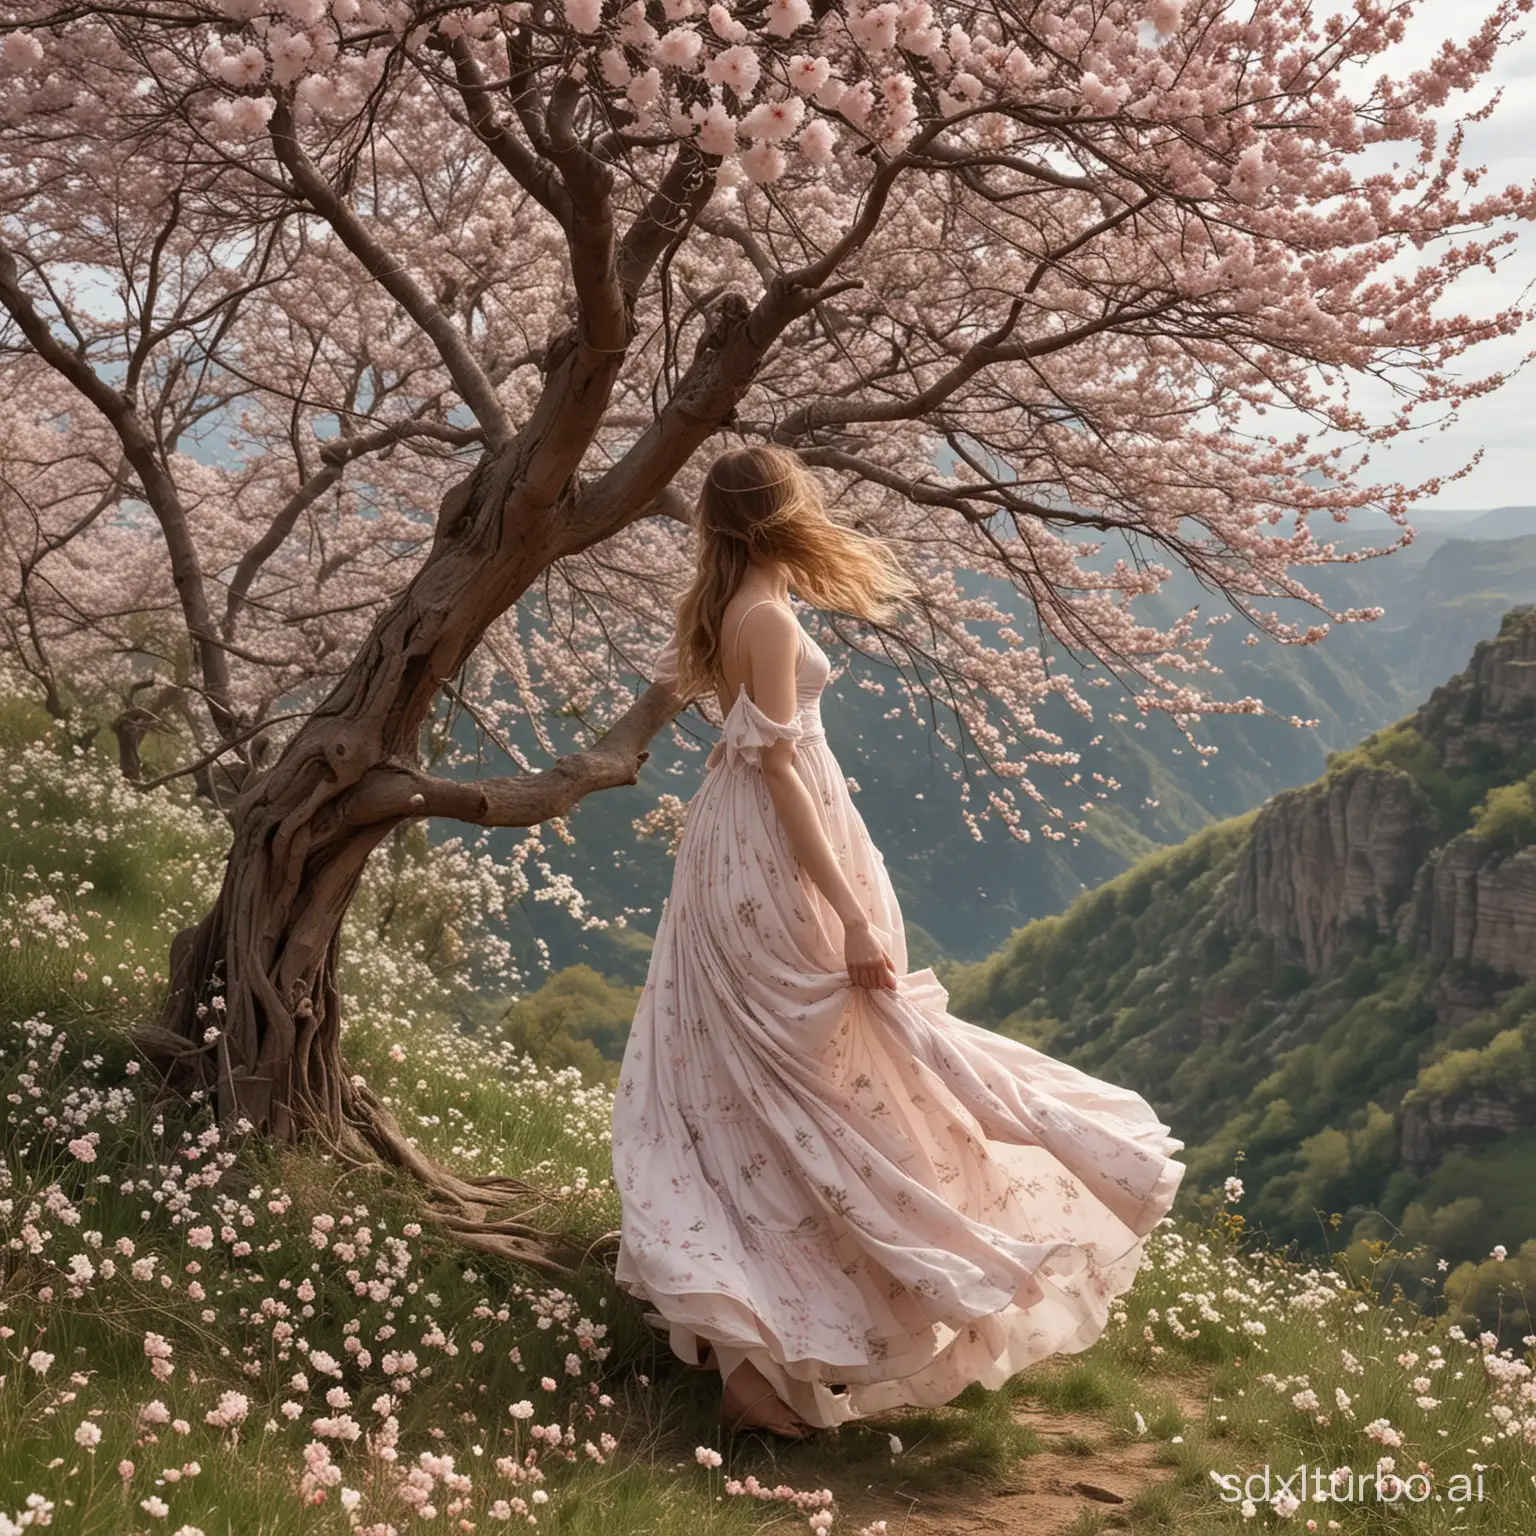 A girl clad in a tattered dress stands with her back turned to the edge of a cliff, the winds lifting and teasing the frayed hem of her garment behind her. Beside her looms a towering tree in full bloom, its branches heavy with blossoms that flutter and fall to the ground like delicate pink and white confetti, creating an ephemeral dance with the gusts of wind. This poignant scene encapsulates a tale of resilience and transience, where the worn-out fabric, the blooming tree, and the fleeting petals each speak volumes about the cycles of life and nature's indifferent yet mesmerizing beauty.